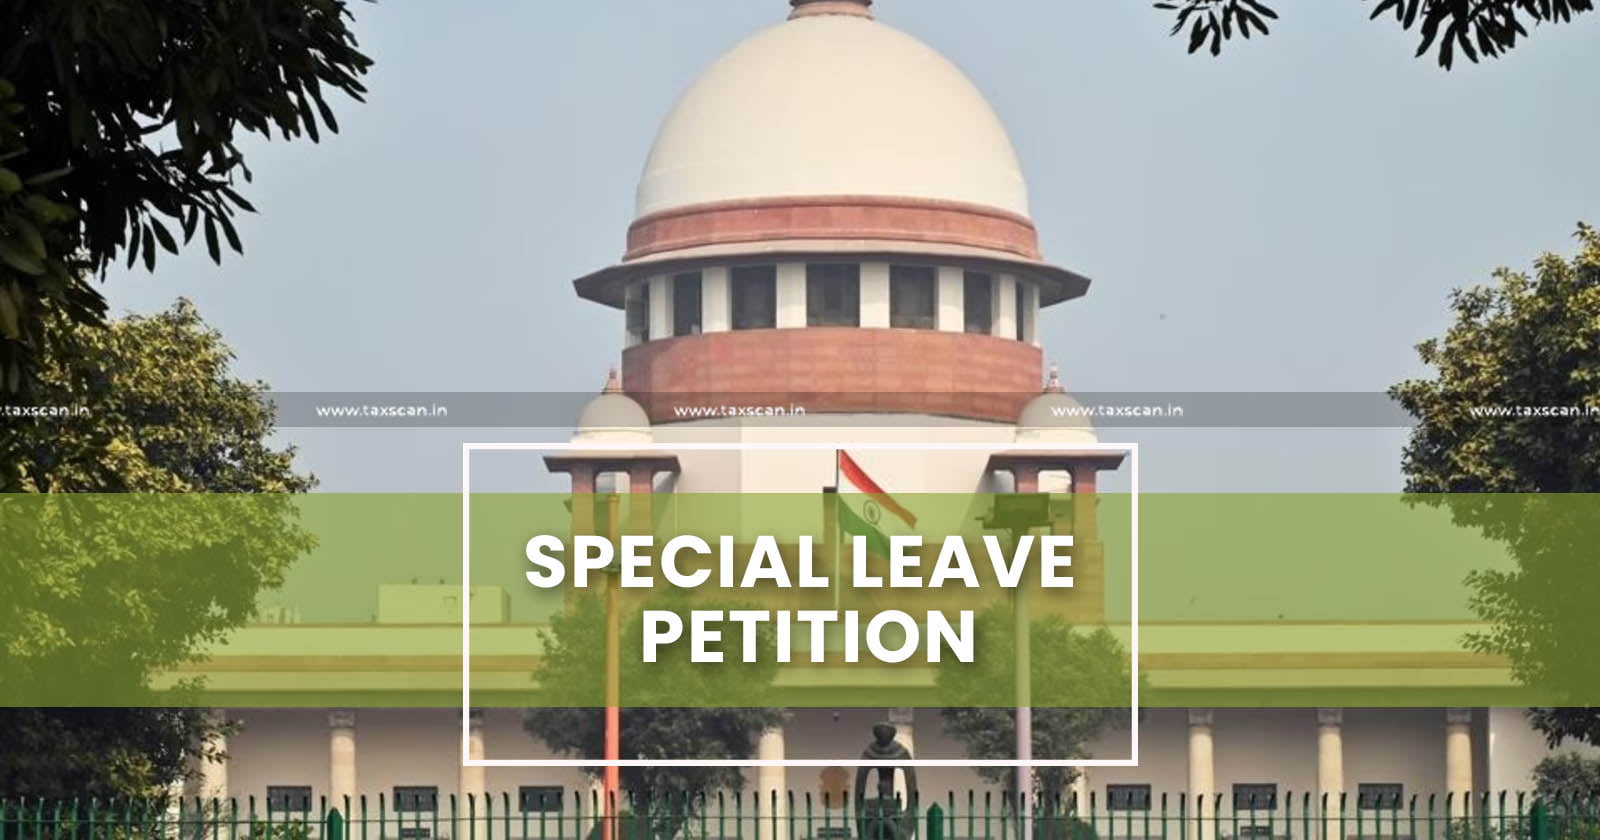 Time Barred Income tax notice - Supreme Court - SC Notice on SLP - Time Barred Notice - Special Leave Petition - Income Tax Department - taxscan